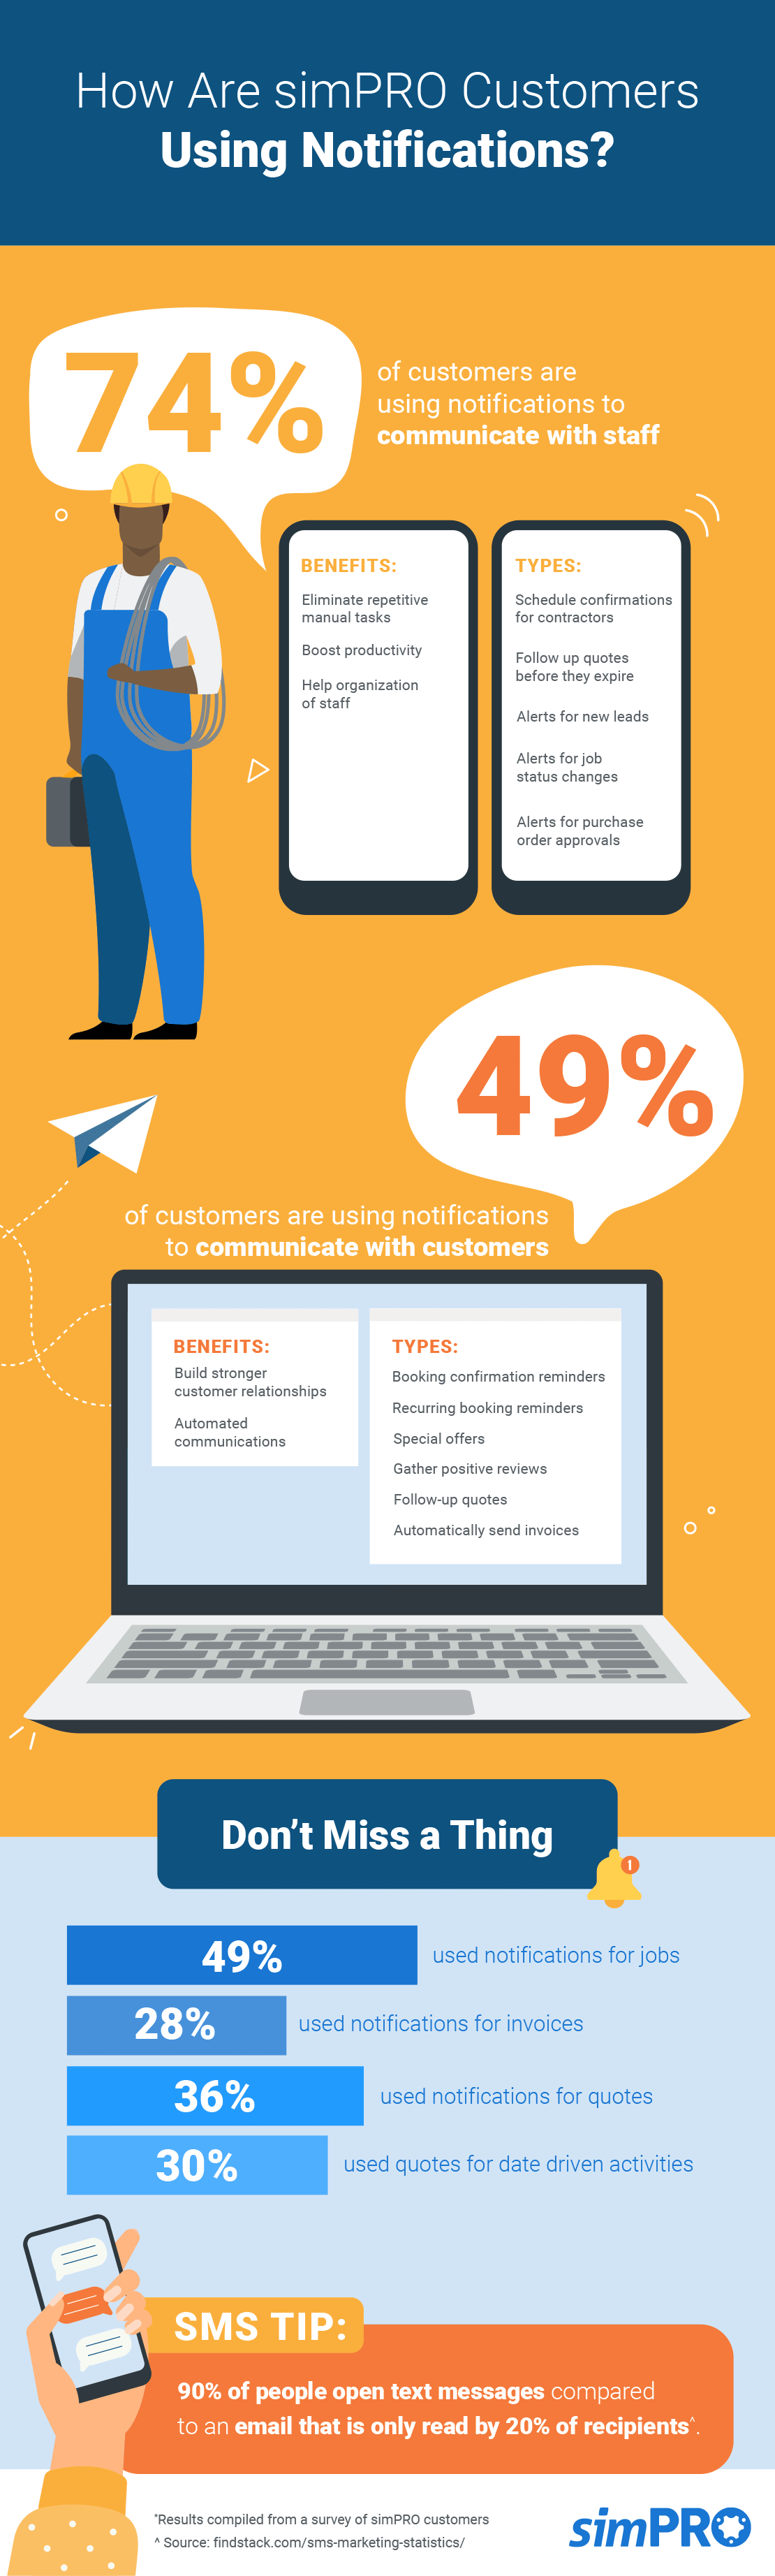 Infographic showing how Simpro customers are using notifications.